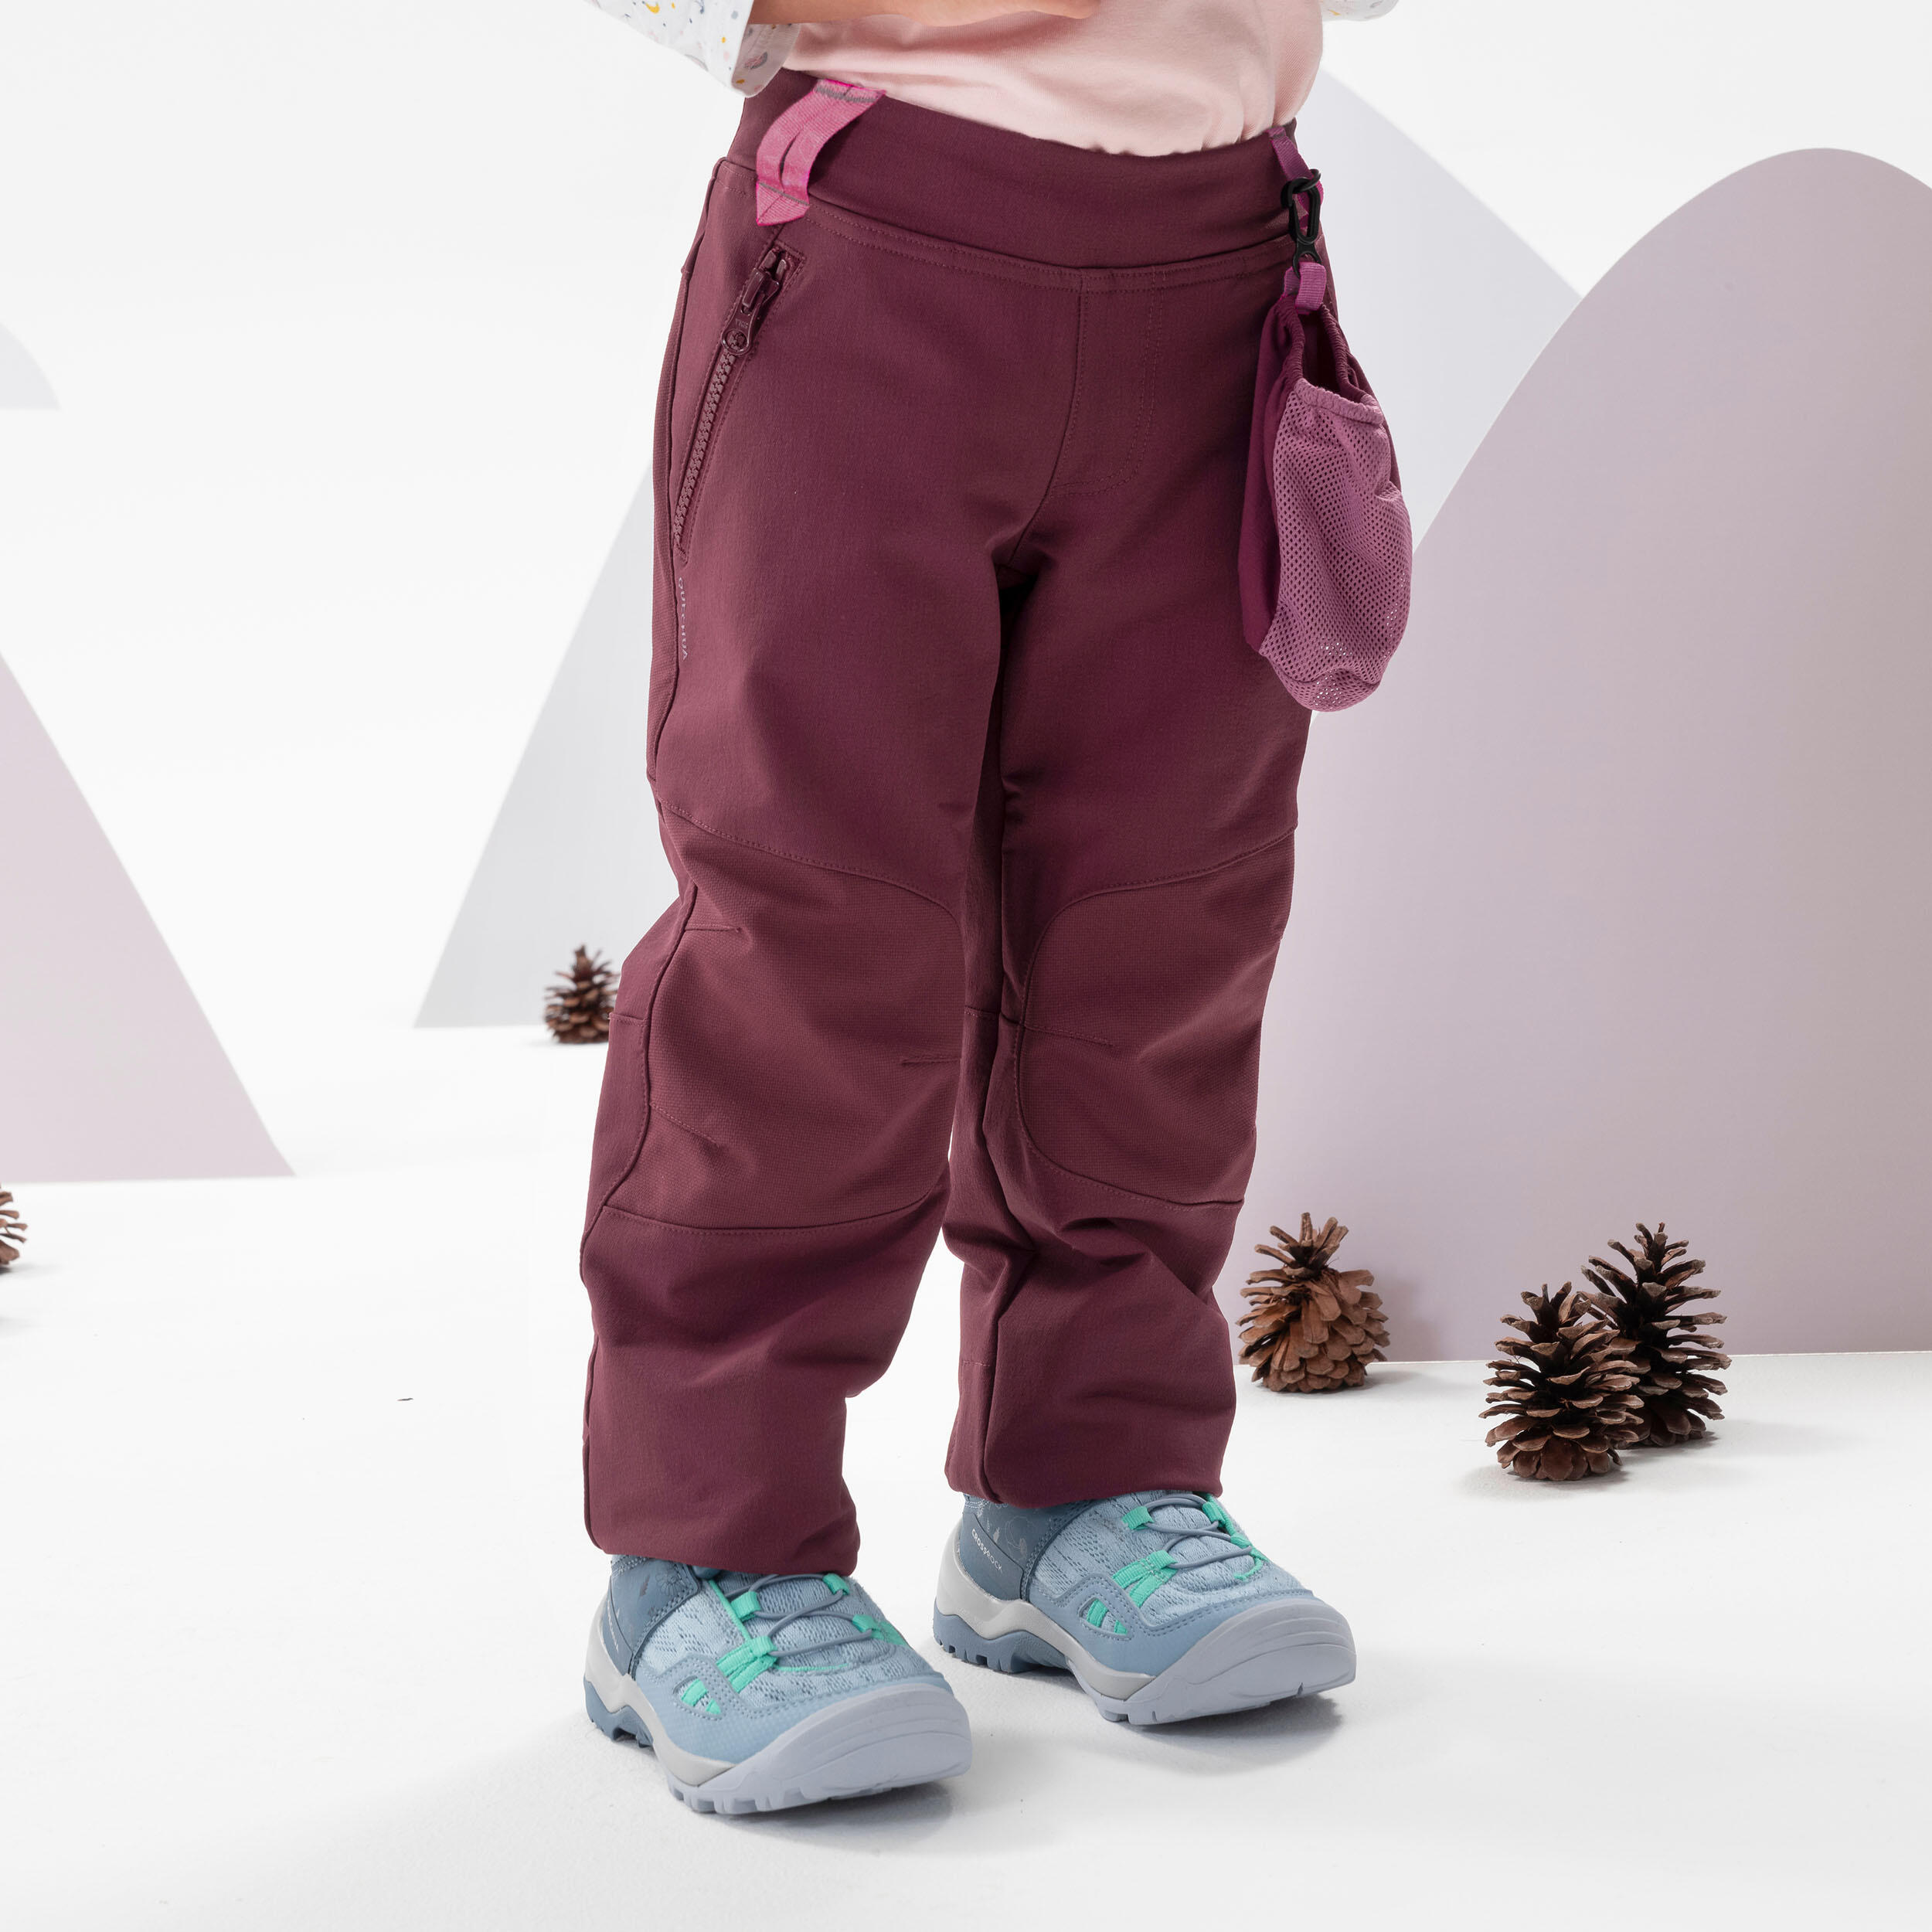 Kids’ Softshell Hiking Trousers - MH550 - Aged 2-6 - Purple 3/6